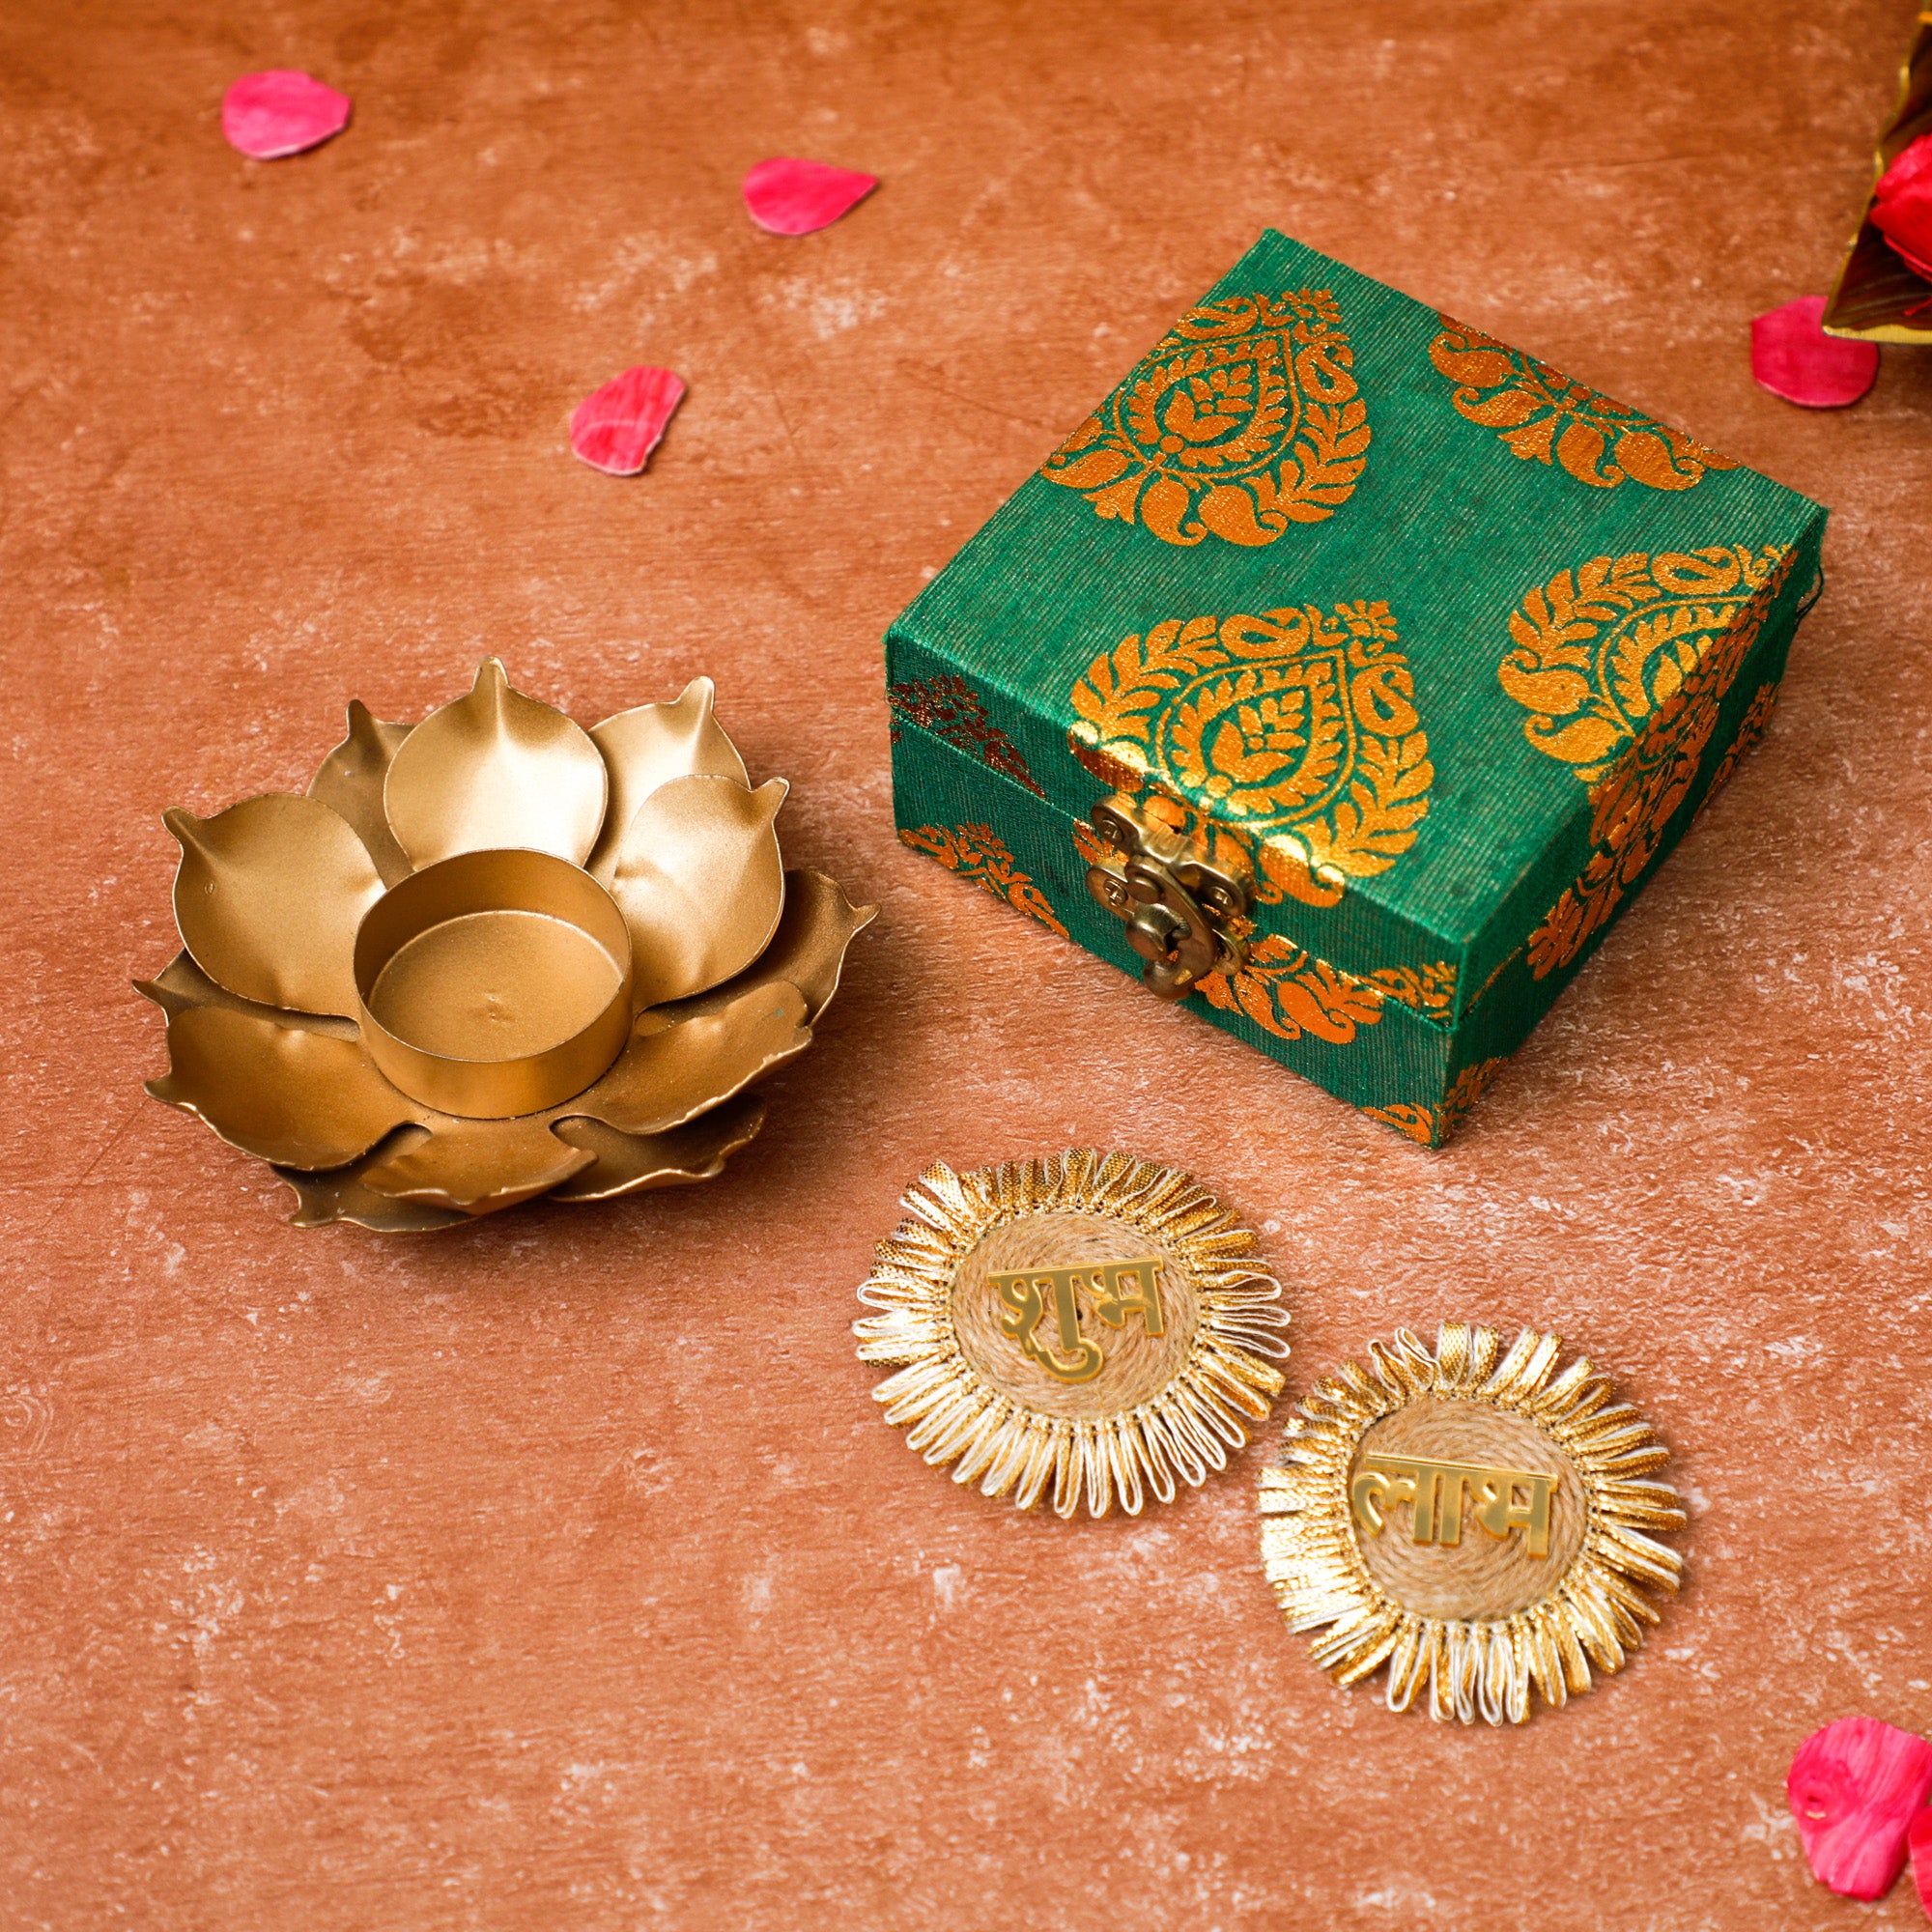 Shop Best Beautiful Diwali Gifts For Friends & Family